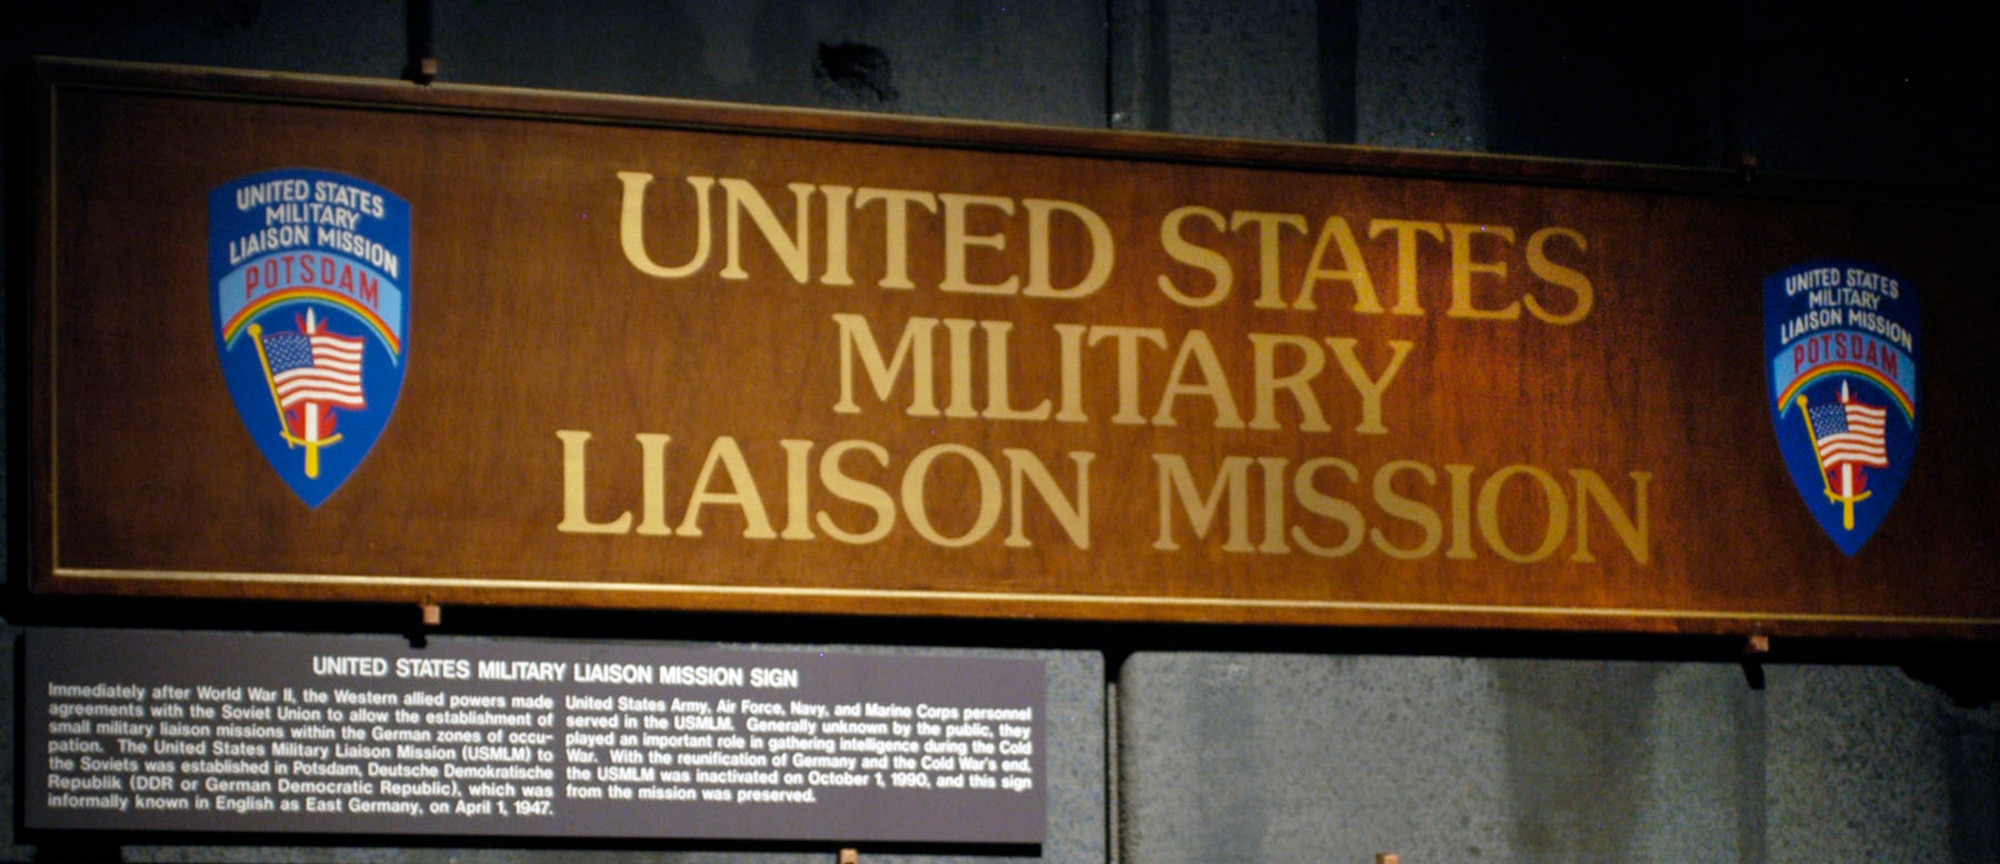 DAYTON, Ohio -- United States Military Liaison Mission Sign on display at the National Museum of the United States Air Force. (U.S. Air Force)